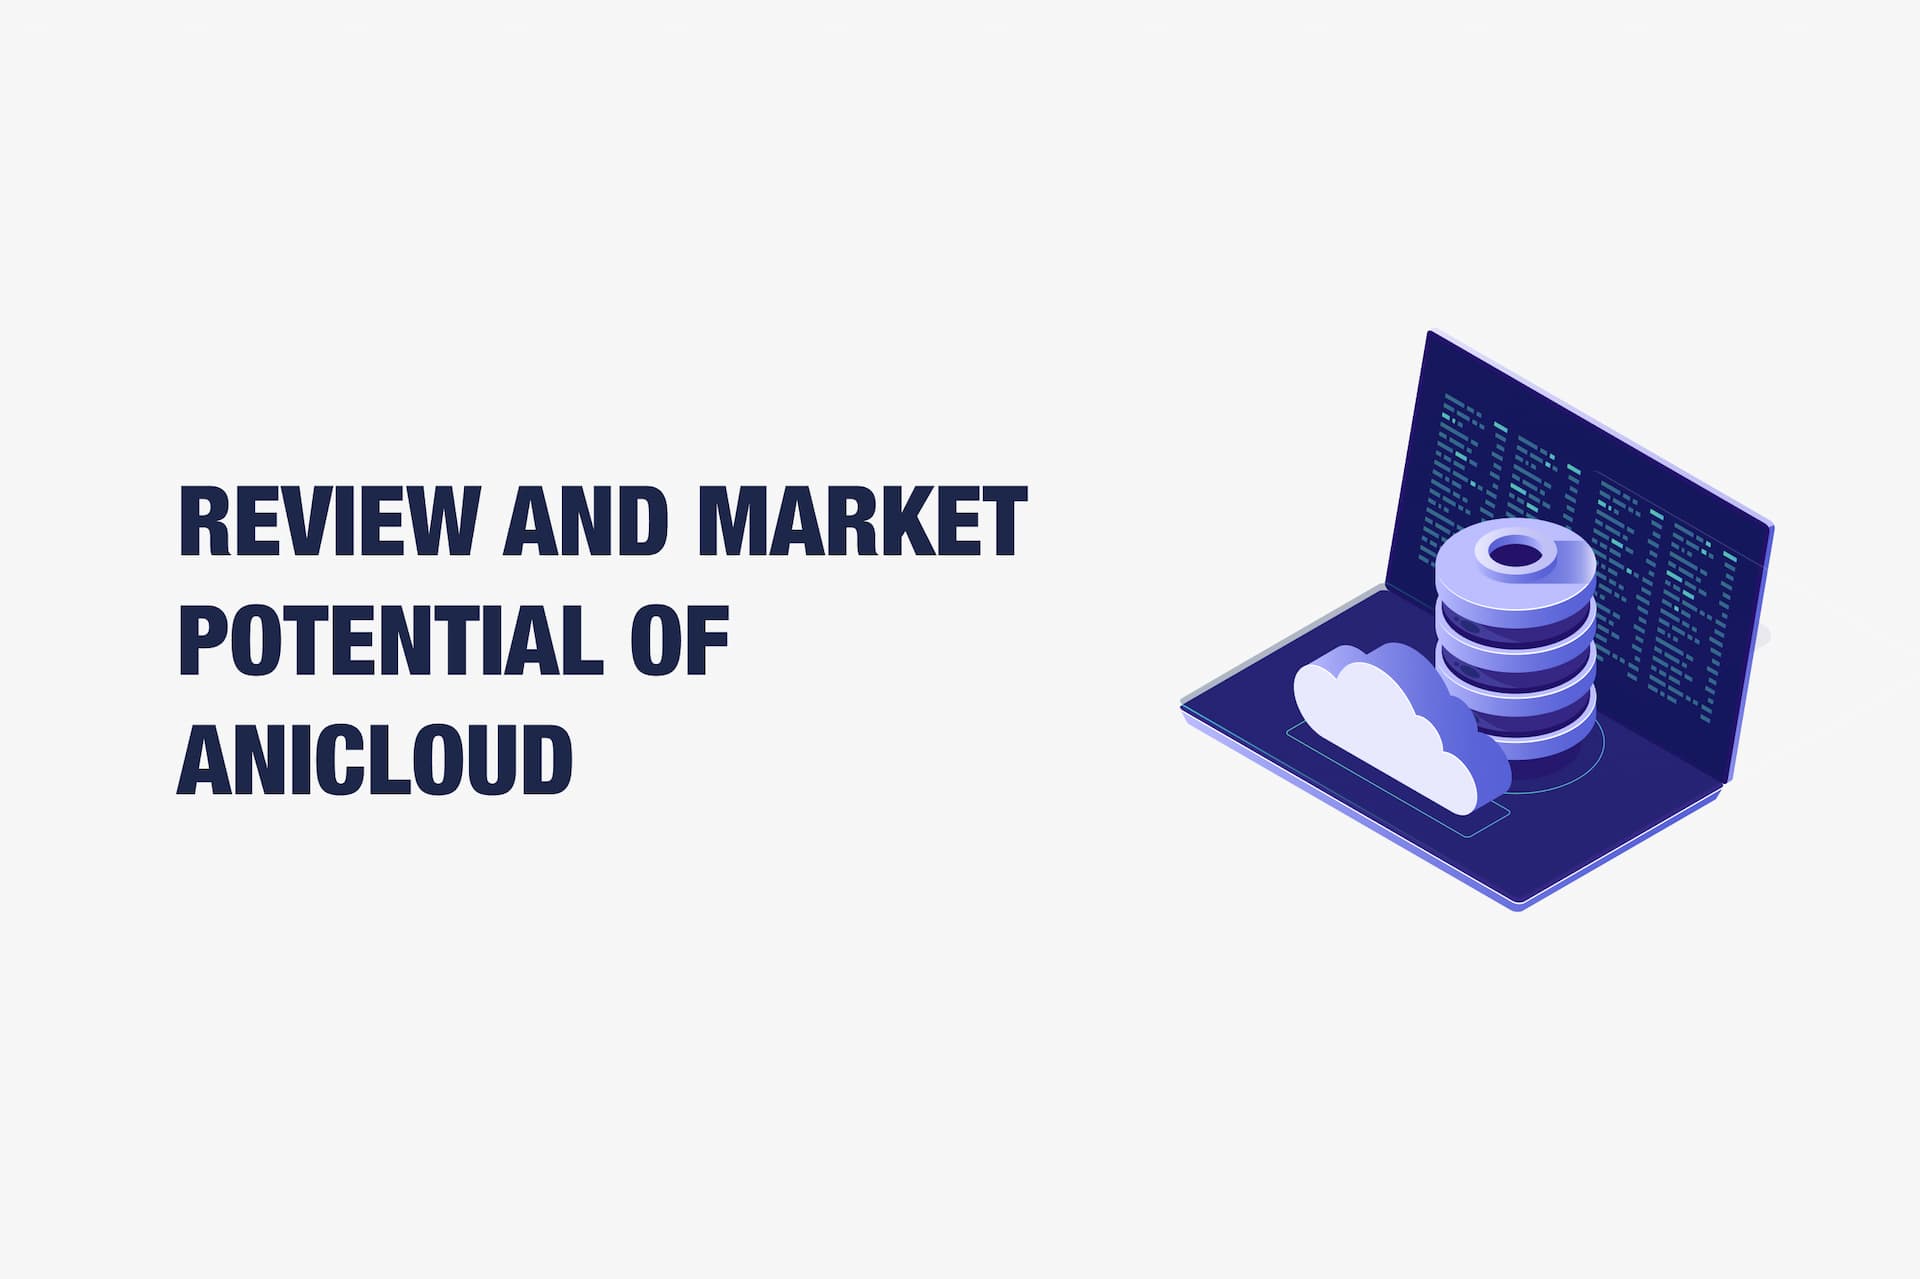 Review and Market Potential of Anicloud